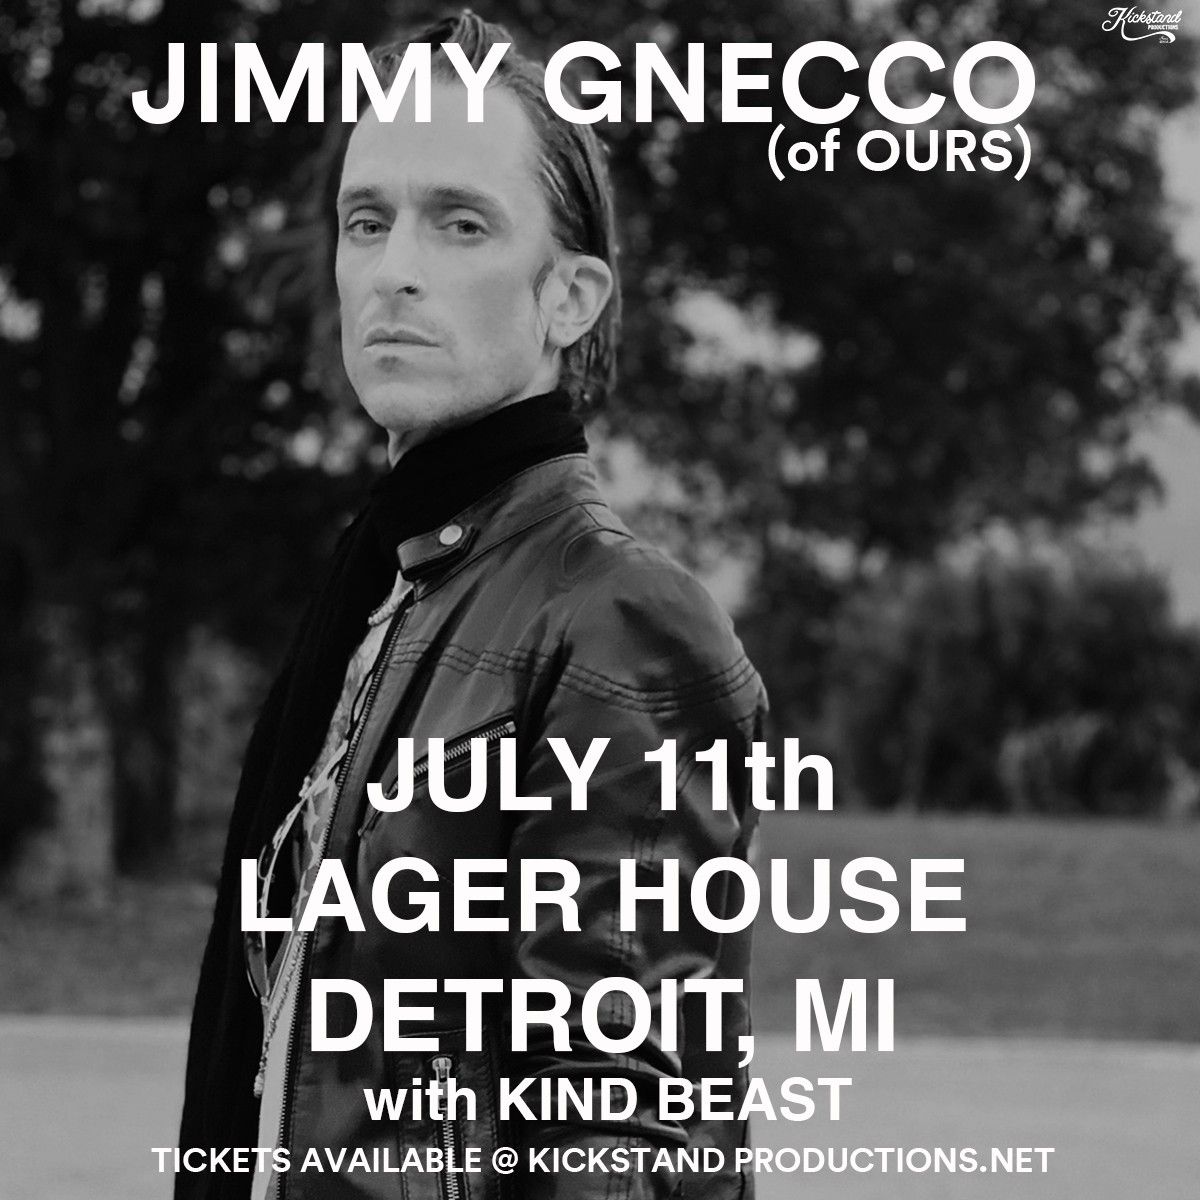 Jimmy Gnecco in Detroit